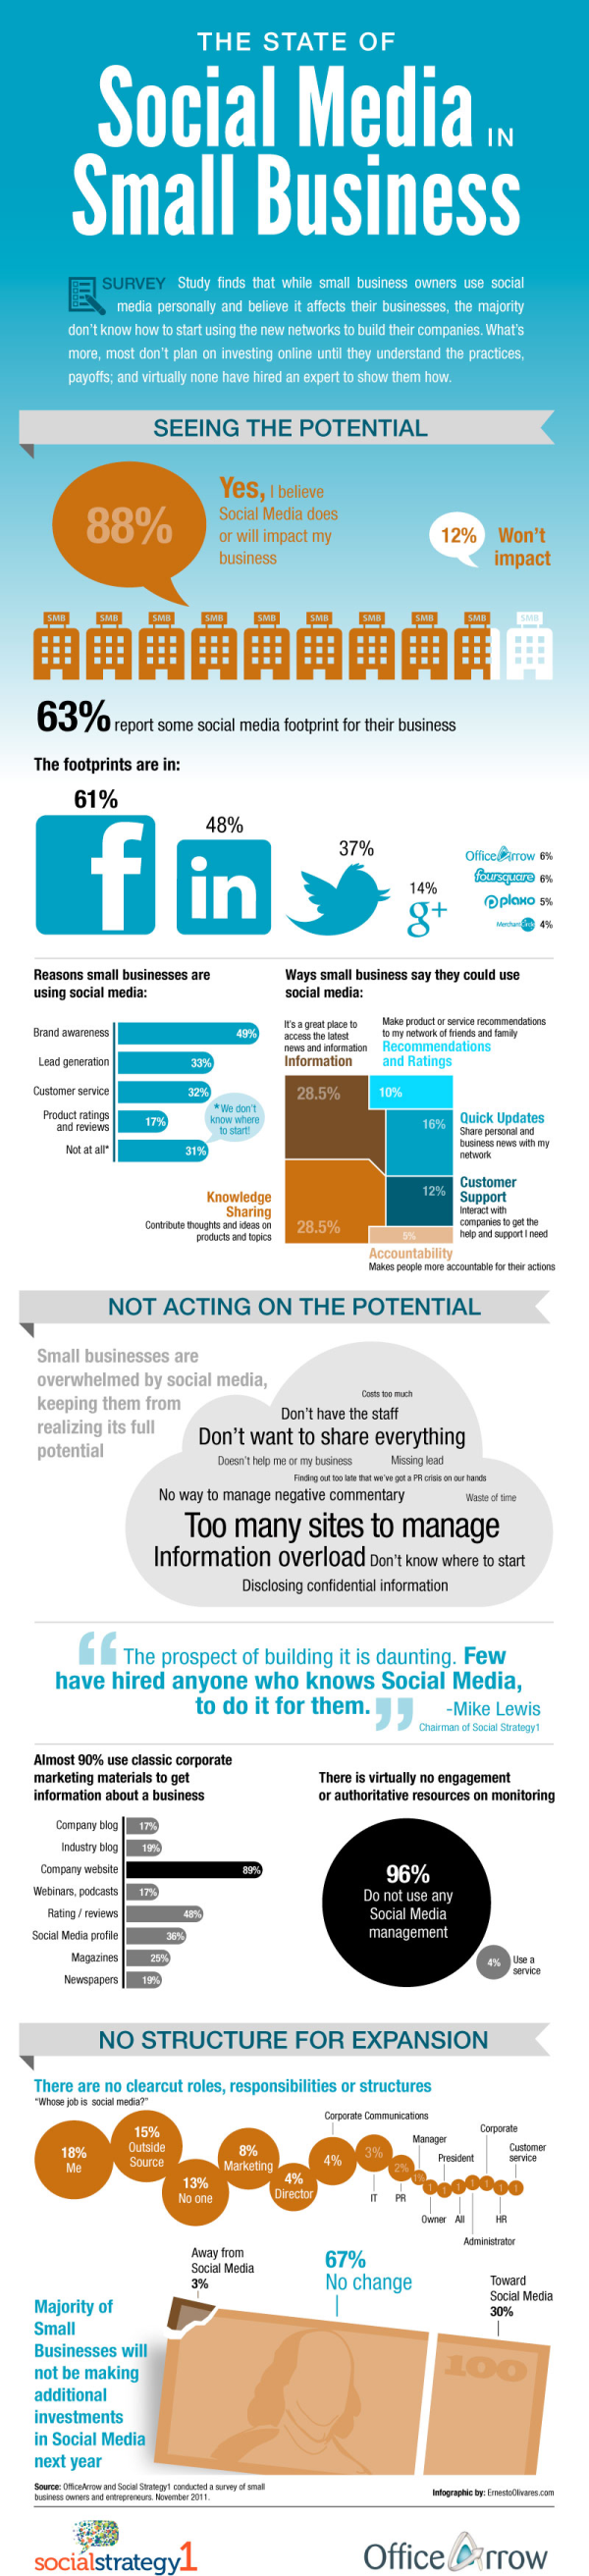 Social Media in Small Business resized 600